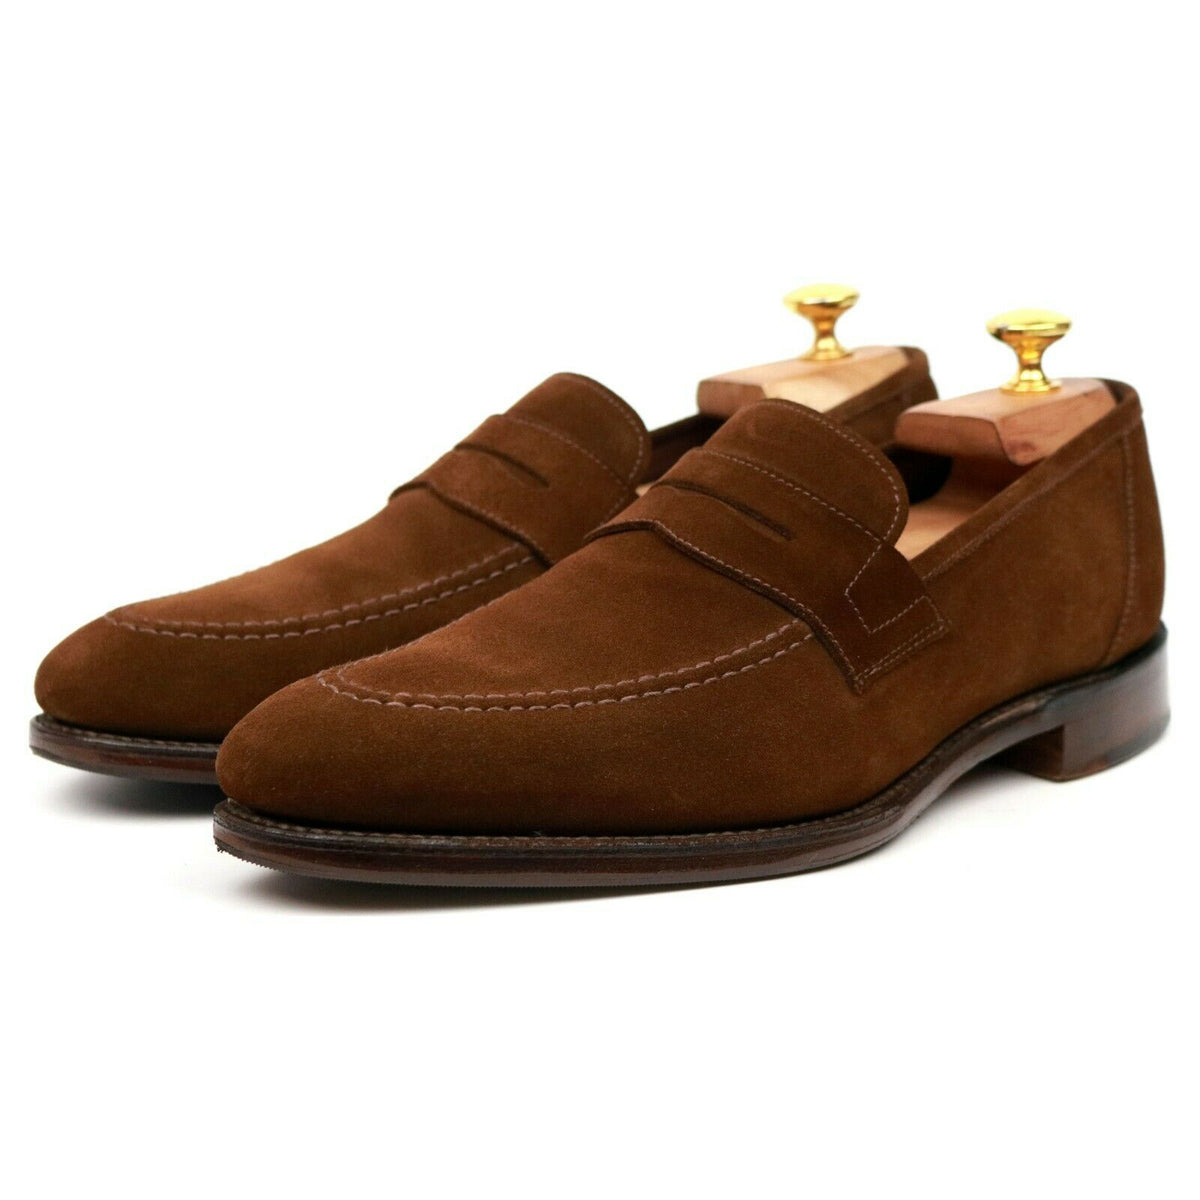 Loake 1880 Legacy 'Anson' Brown Suede 